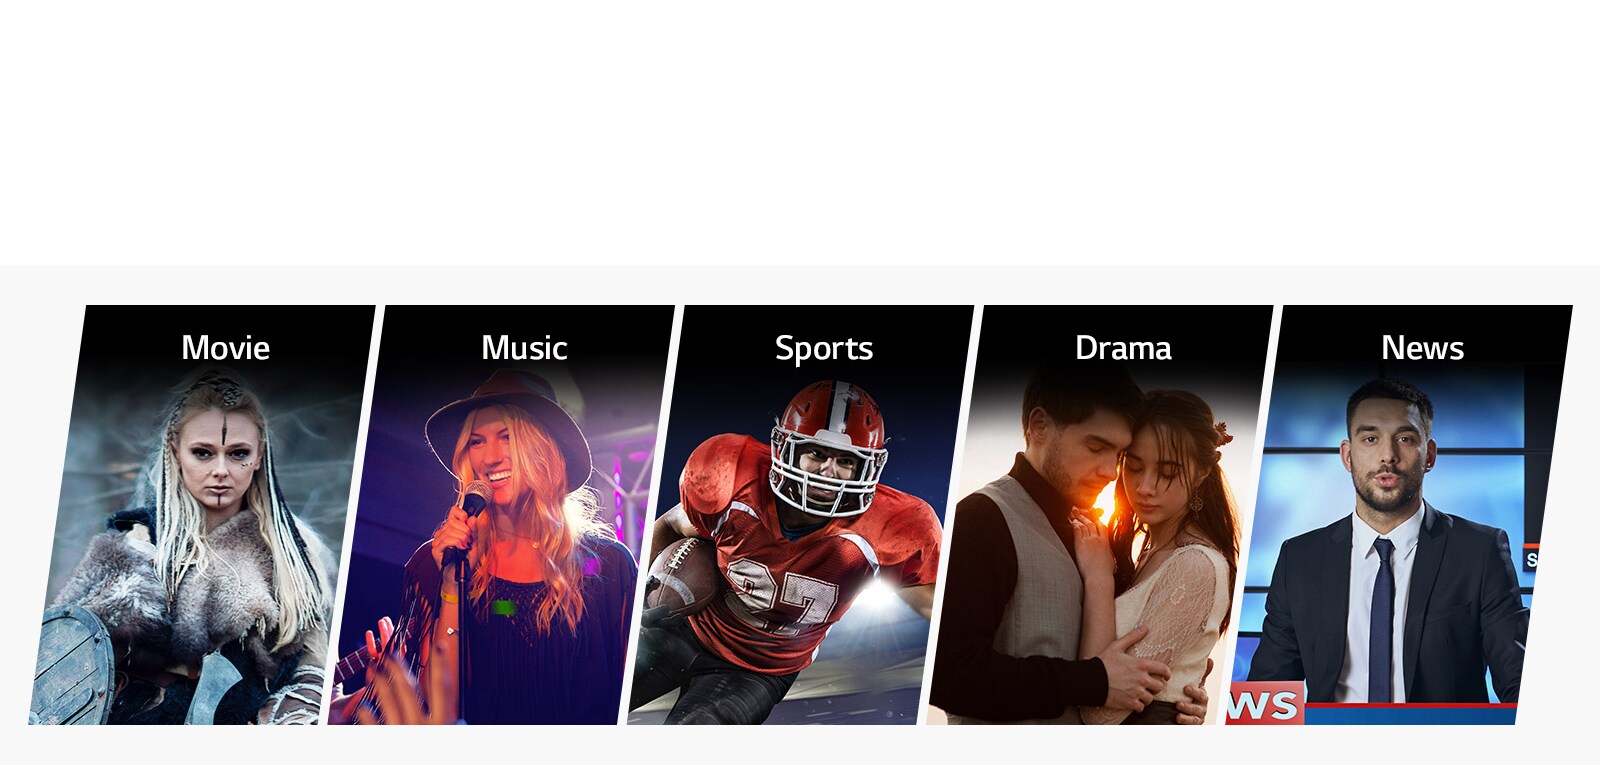 Five vertical title cards for Movie, Music, Sports, Drama and News